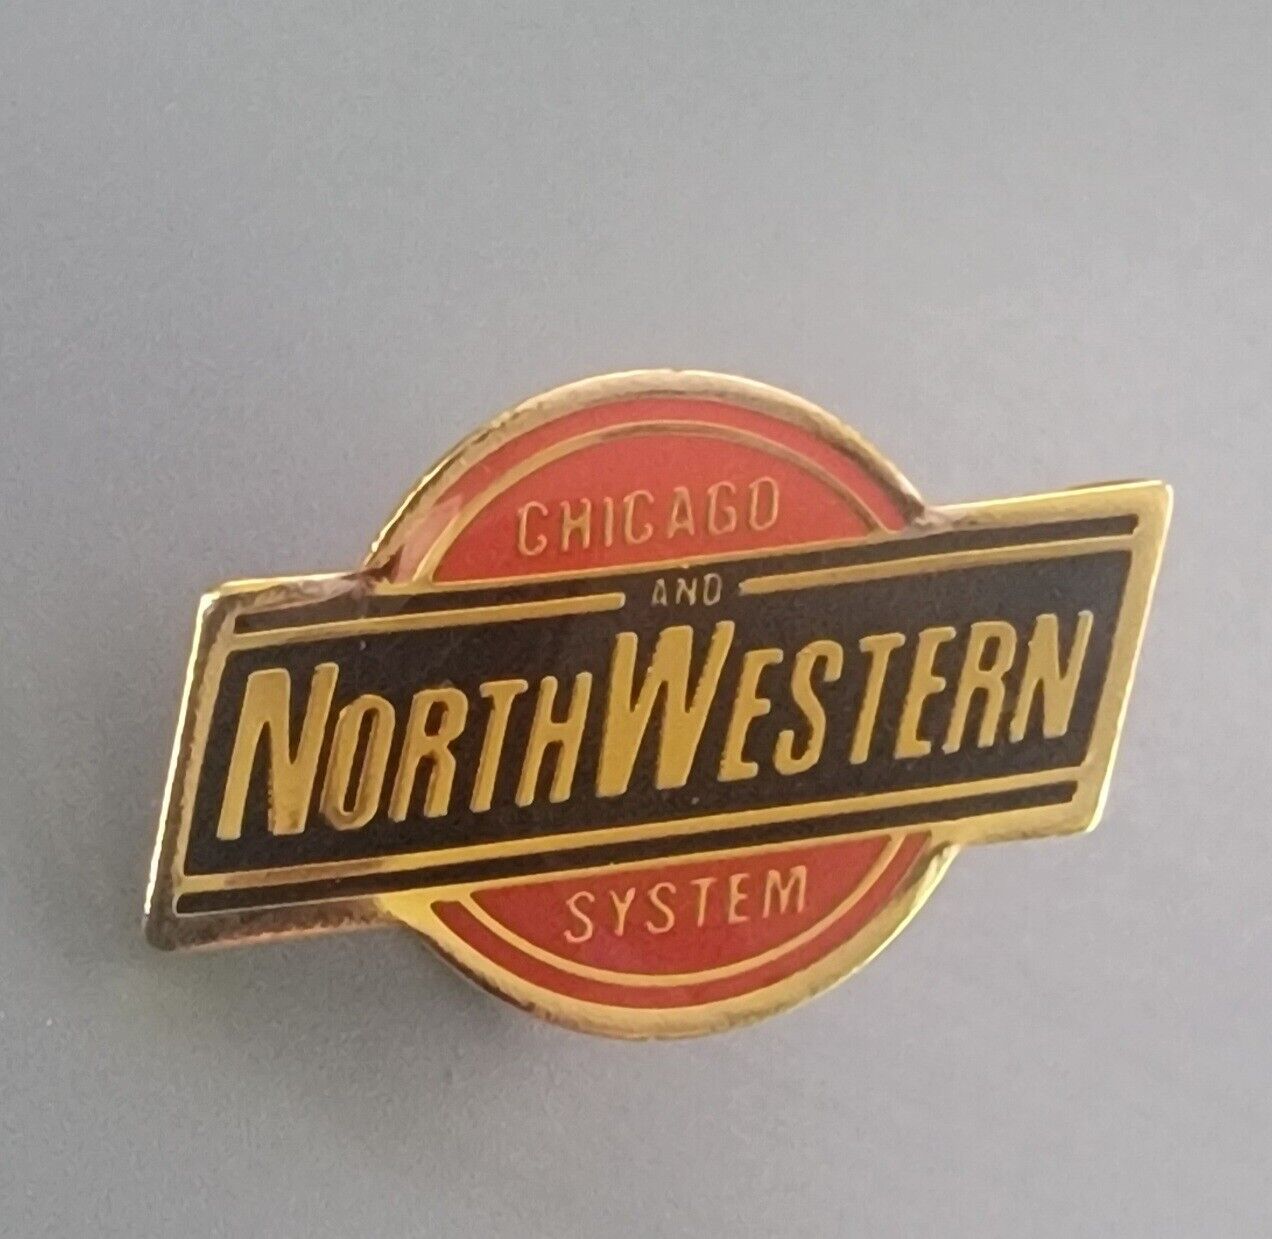 Chicago and North Western System Lapel Pin